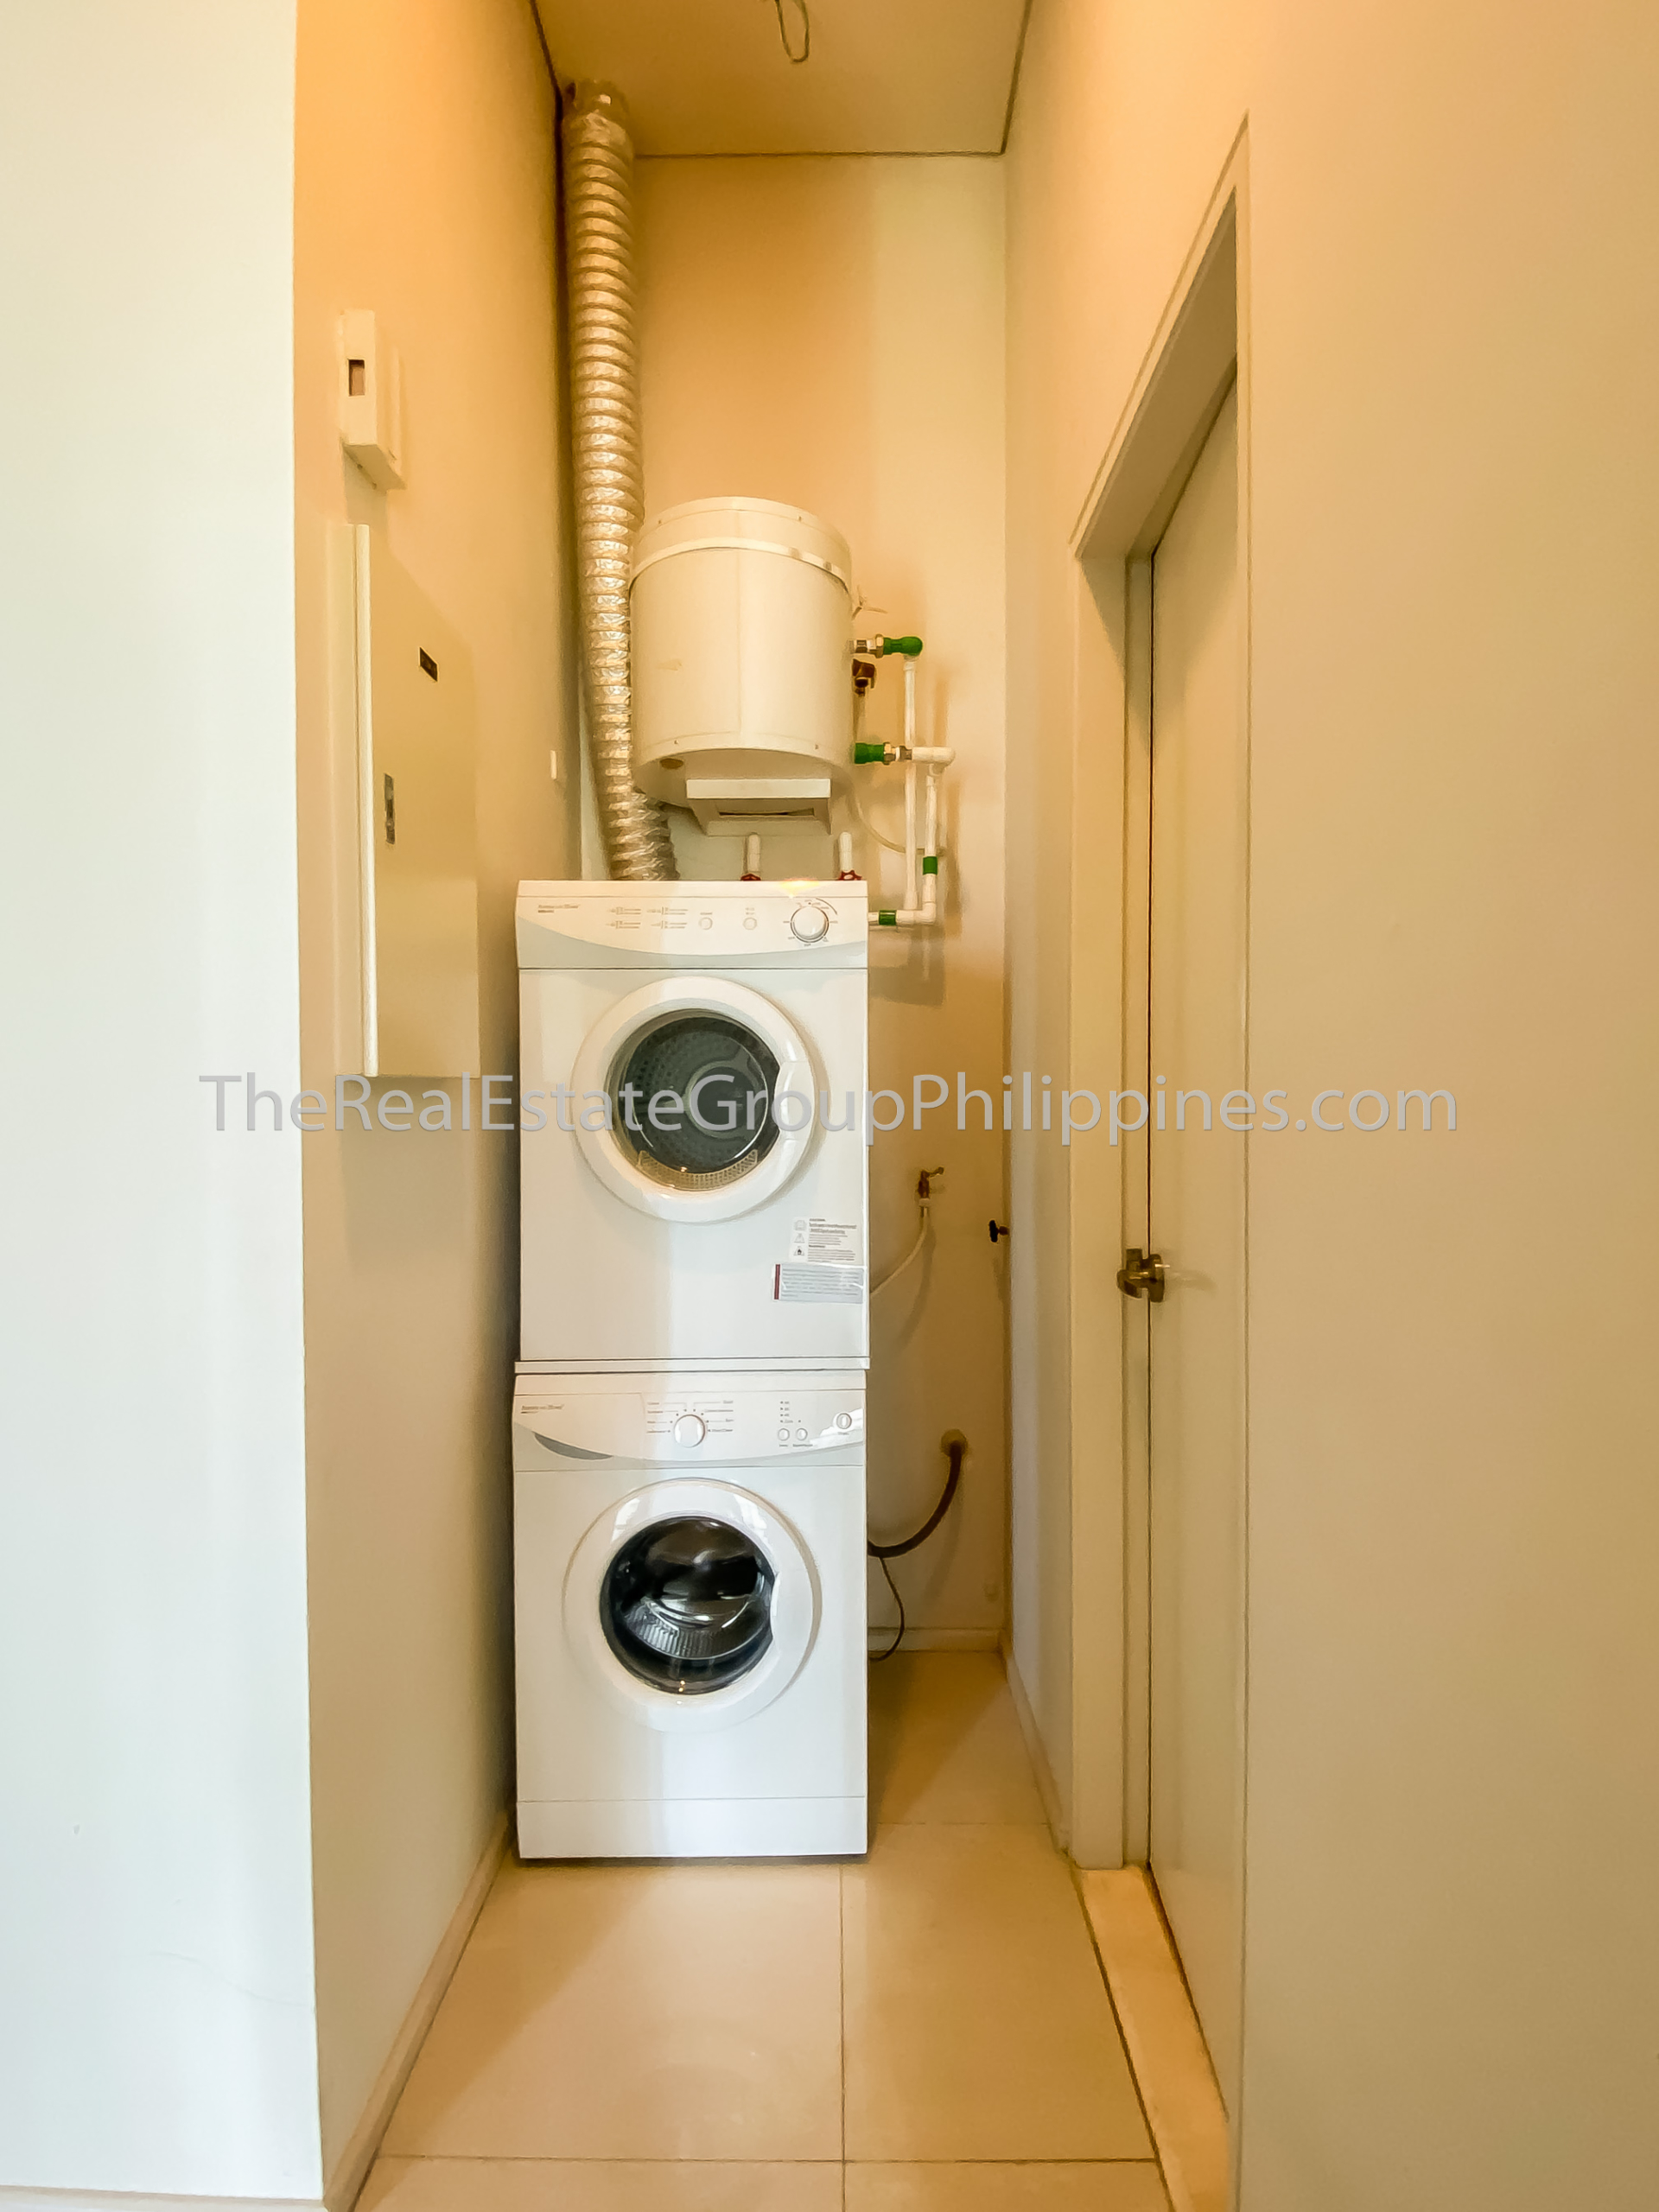 1BR Condo For Rent, Arya Residences, Tower 1, BGC - ₱75K Per Month-5